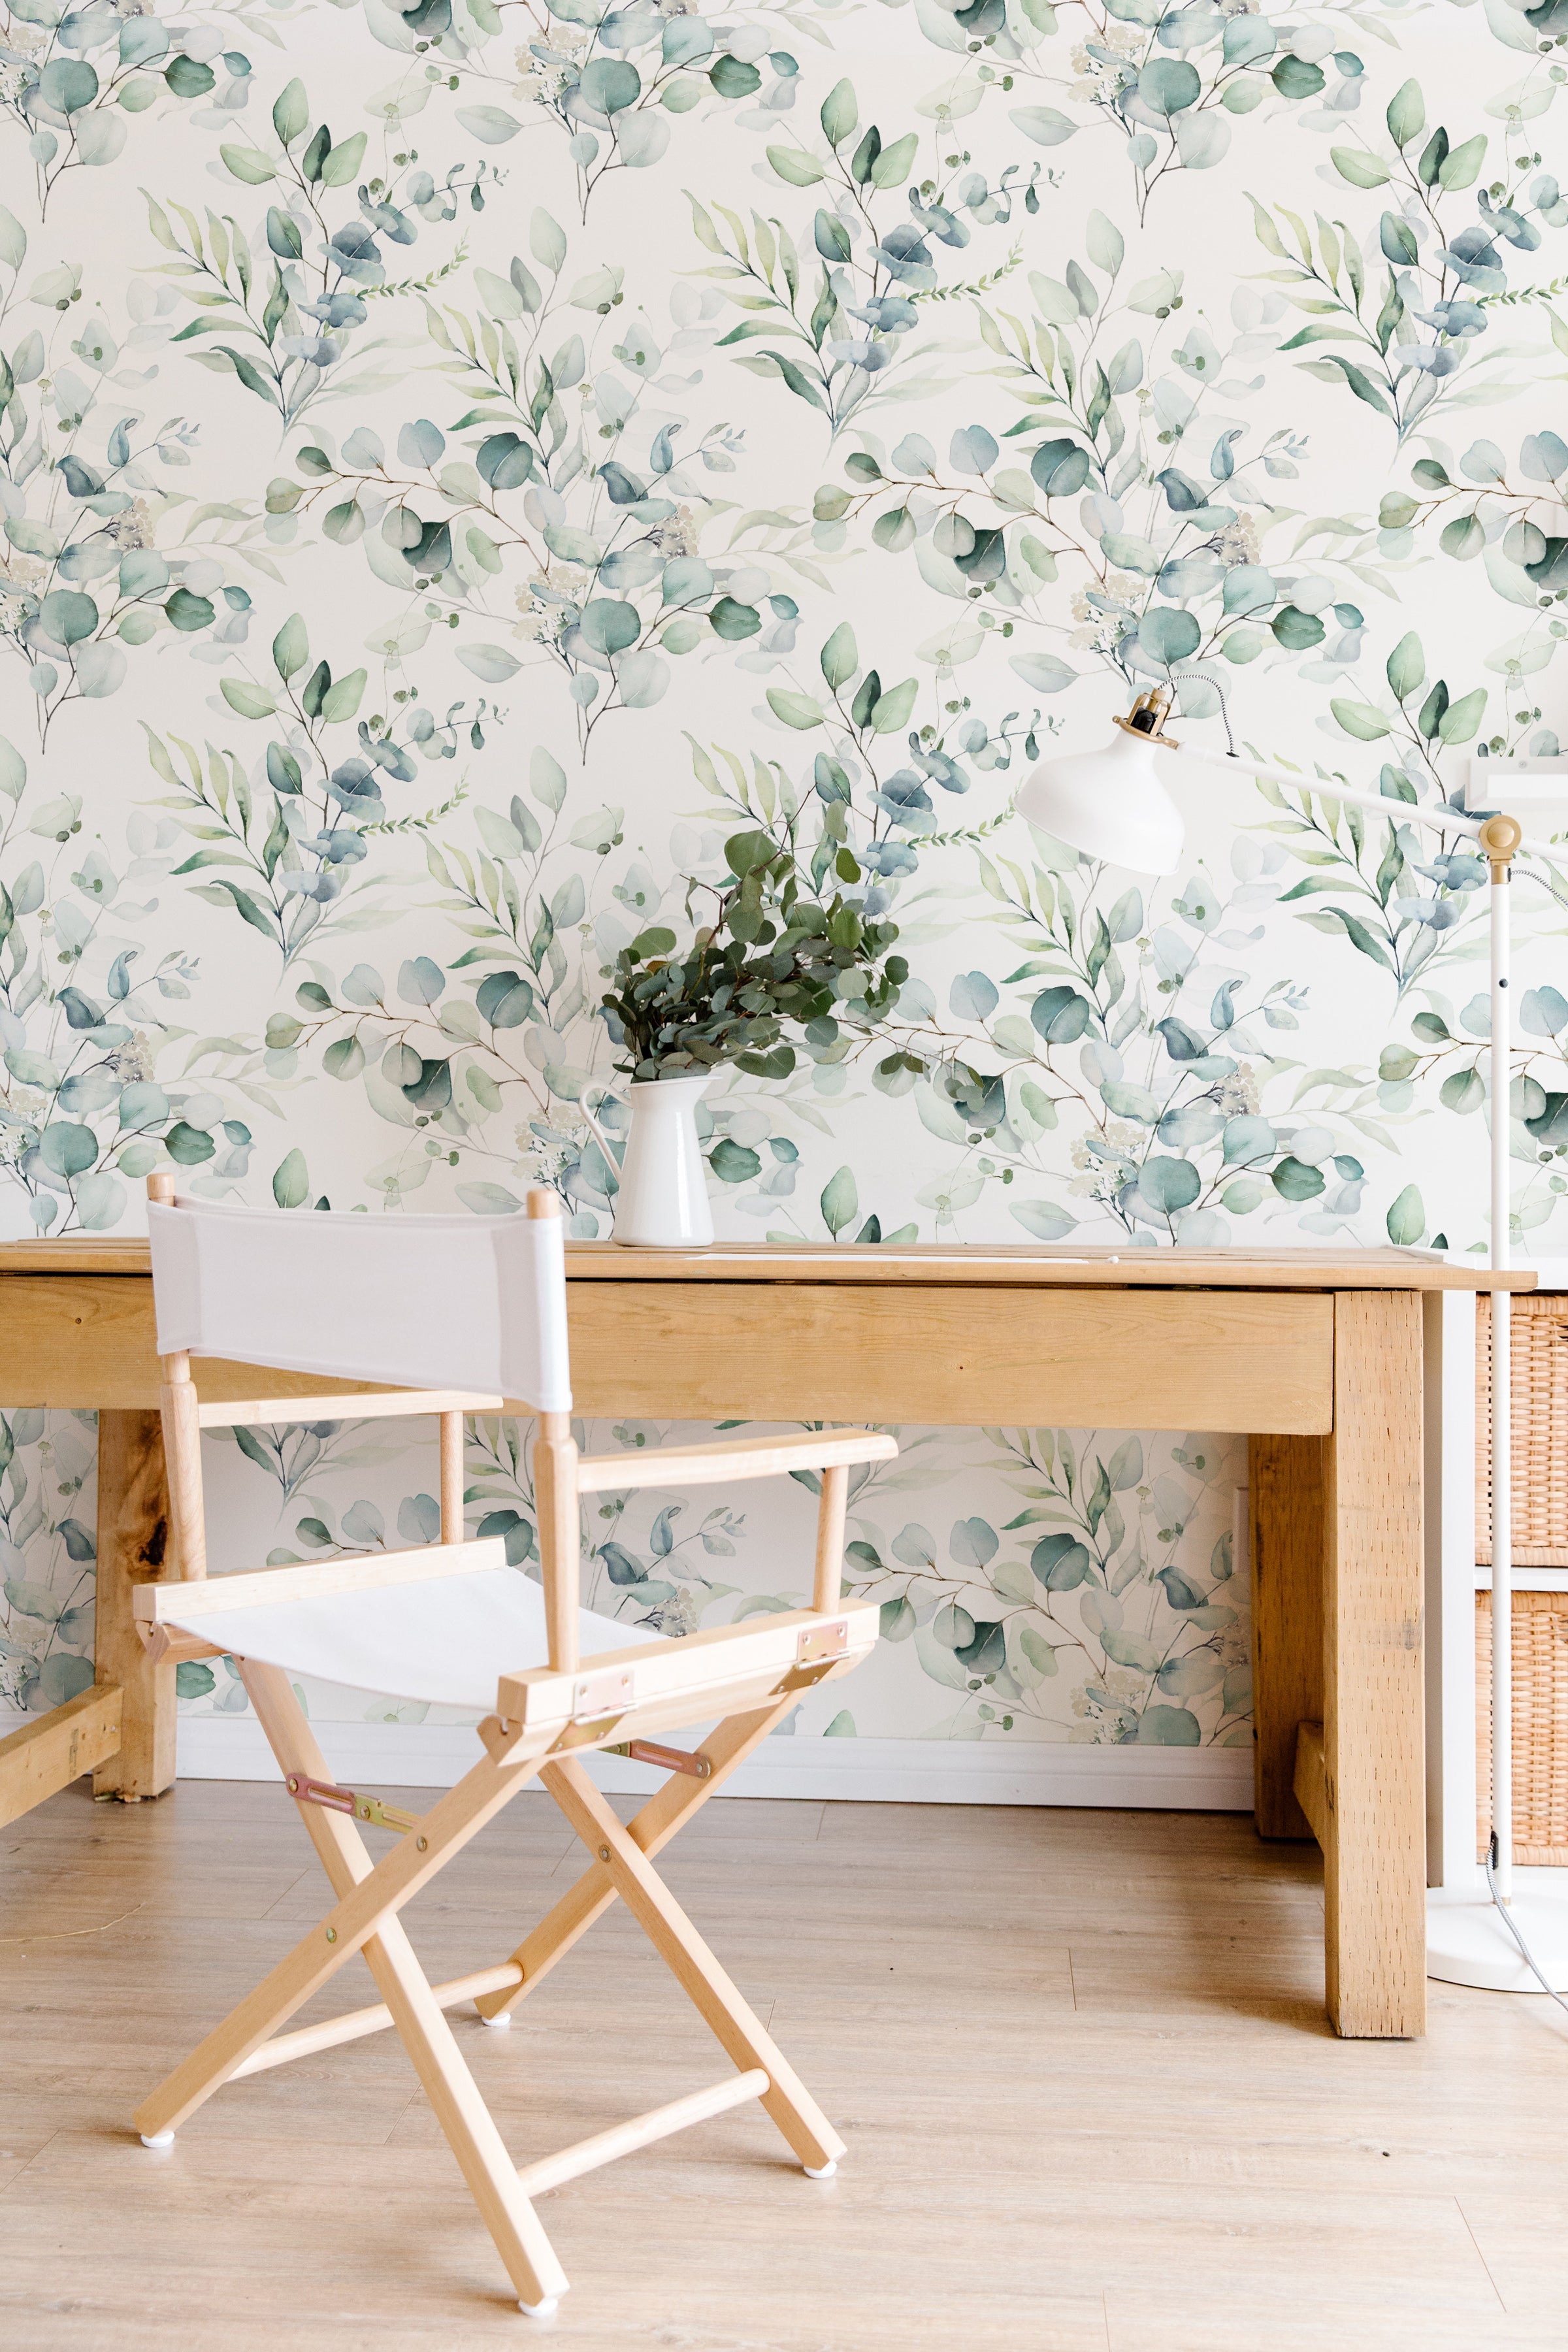 A bright and airy workspace with Green Leaves and Branches Wallpaper, wooden desk, and director's chair creating a refreshing indoor atmosphere.